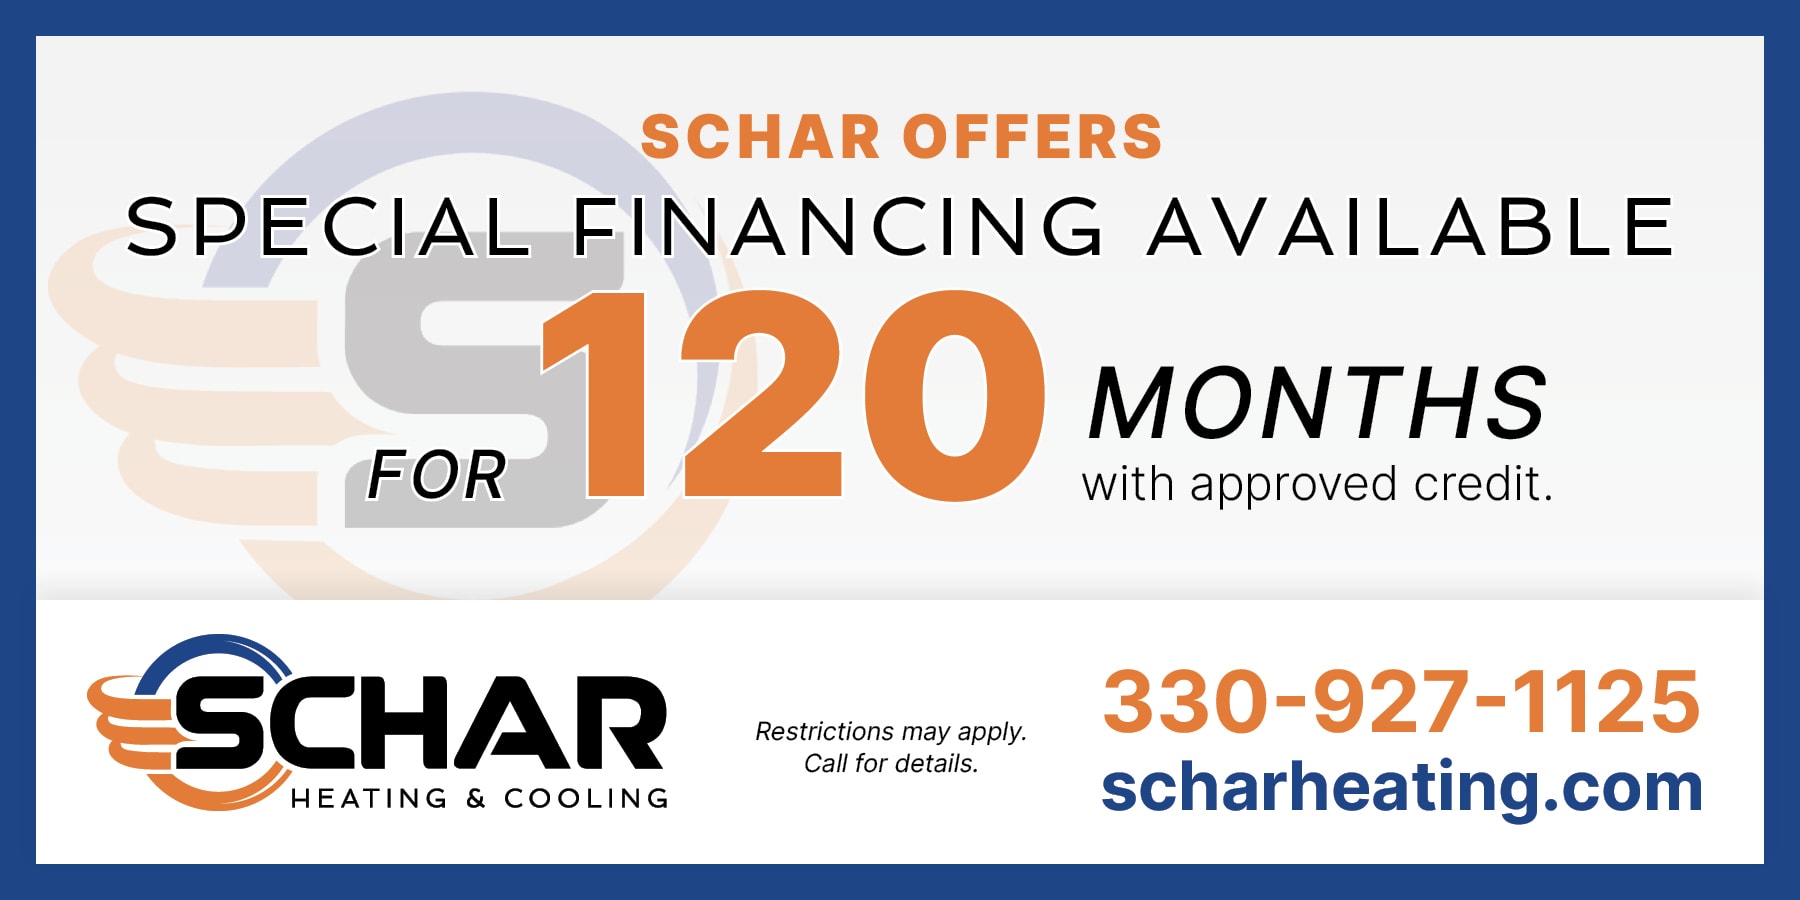 financing options of up to 120 months.